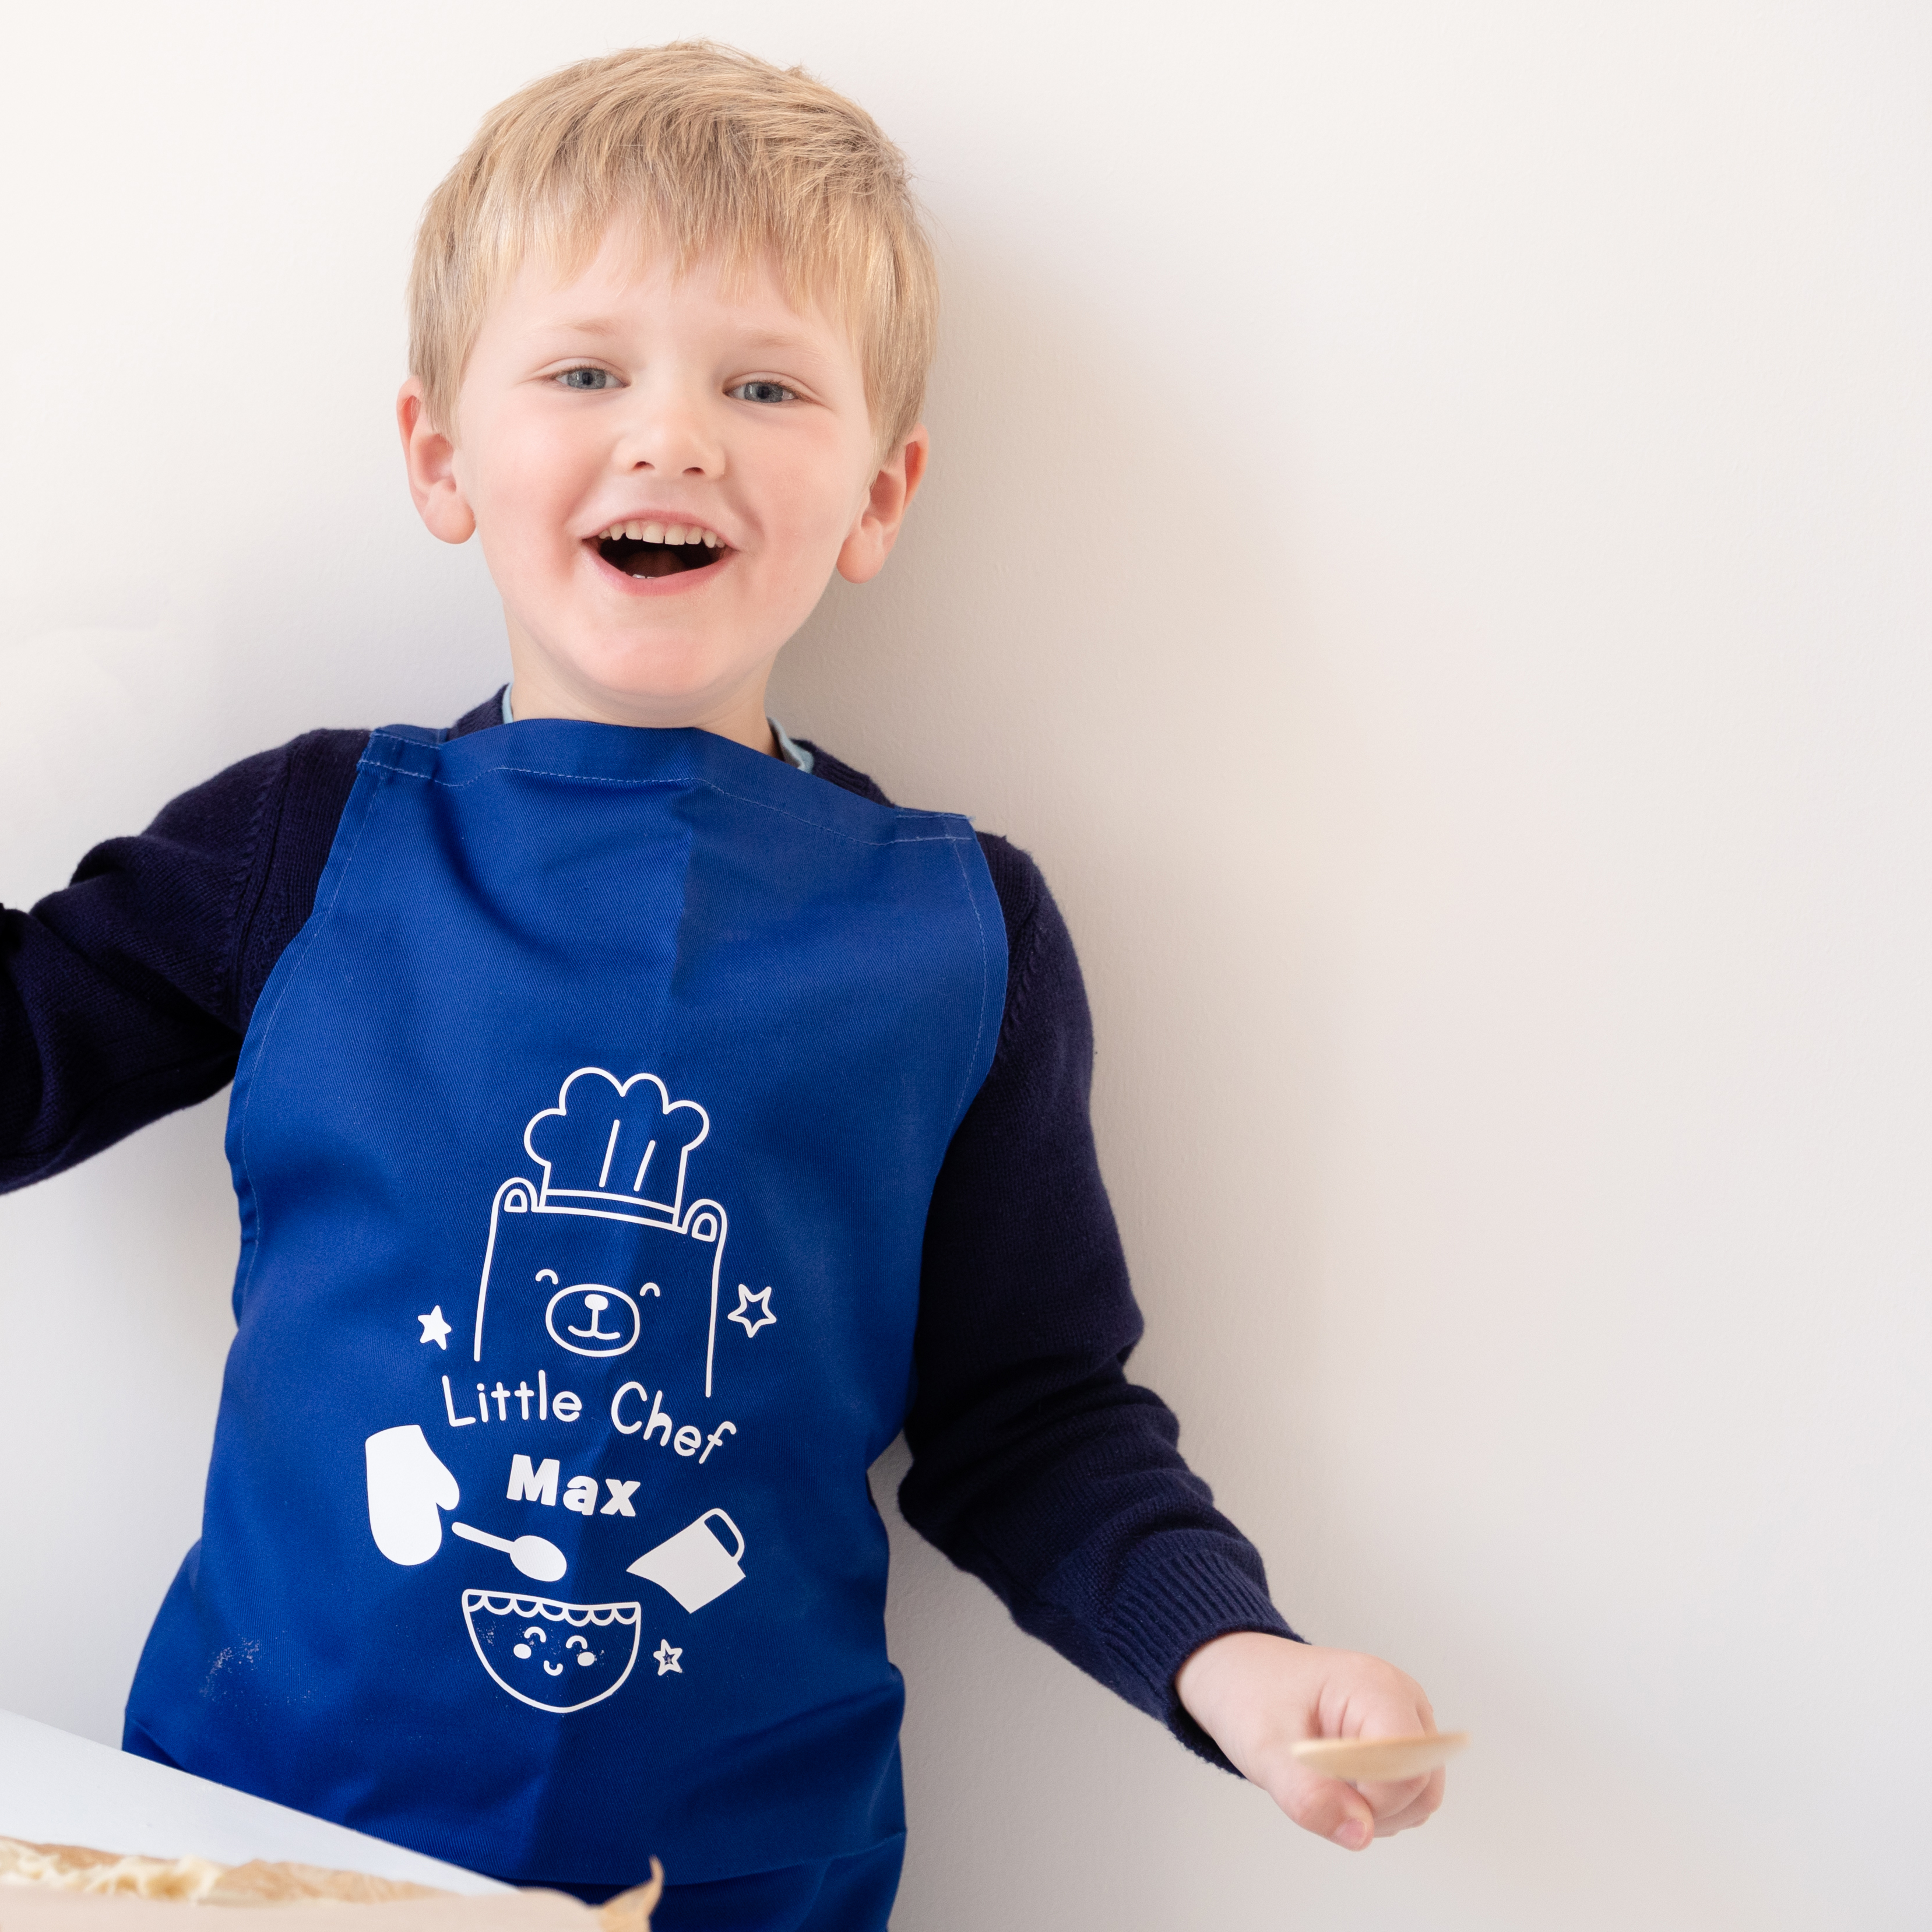 Personalised Little Chef Baking Activity Gift Set